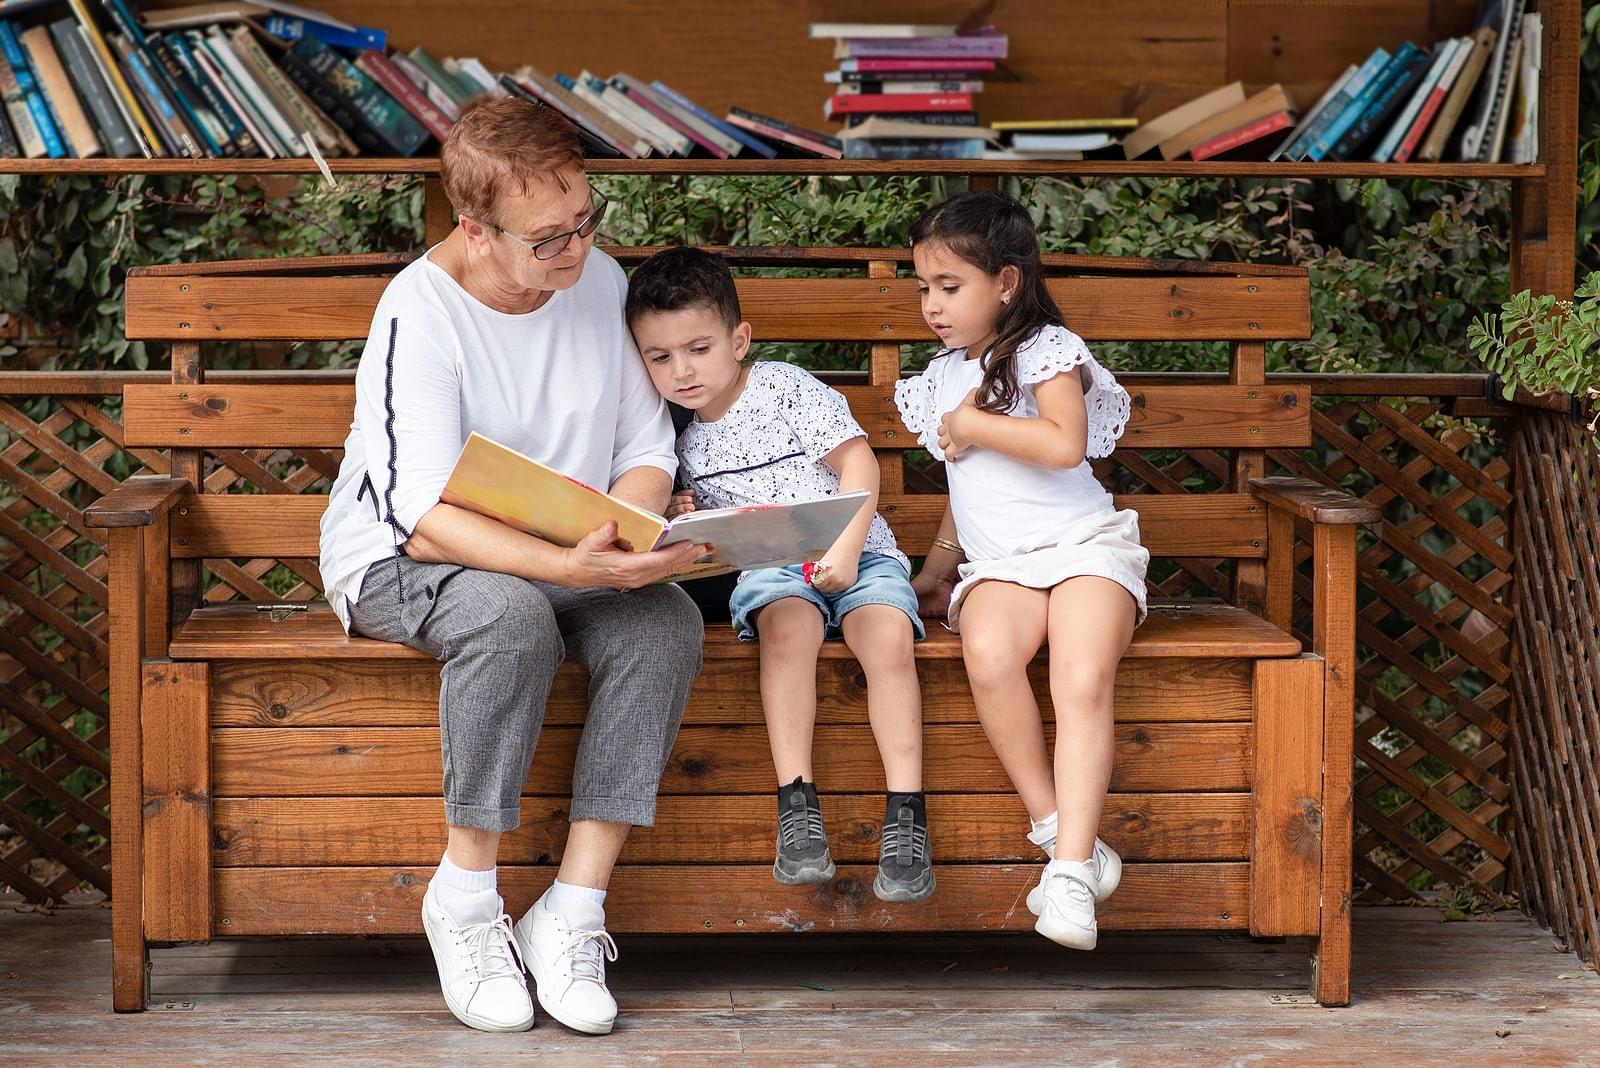 A grandmother reading a book with two children on a wooden bench at a library in front of a book shelf